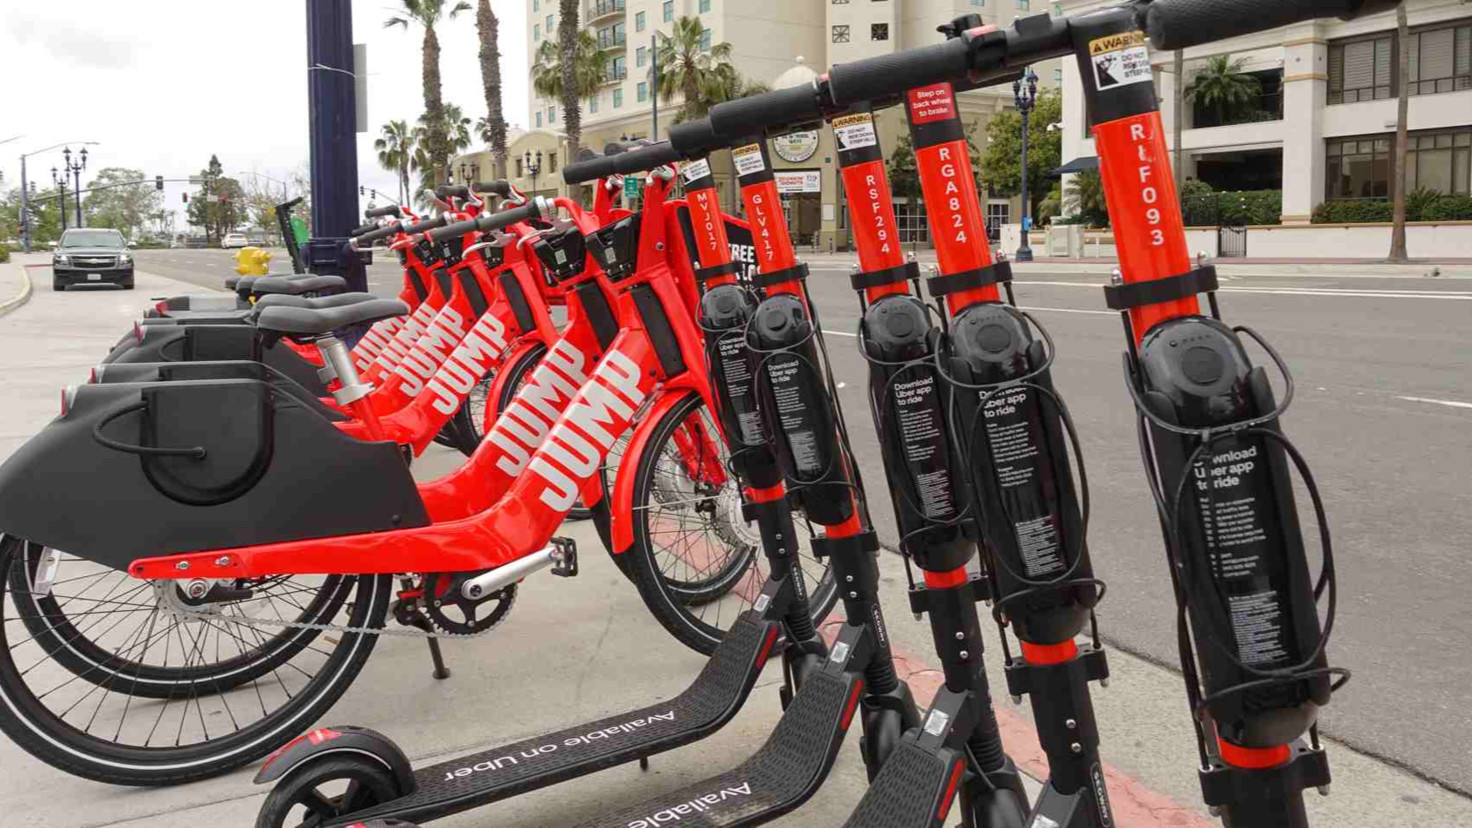 Los Angeles city and Uber Technologies in electric scooter data row